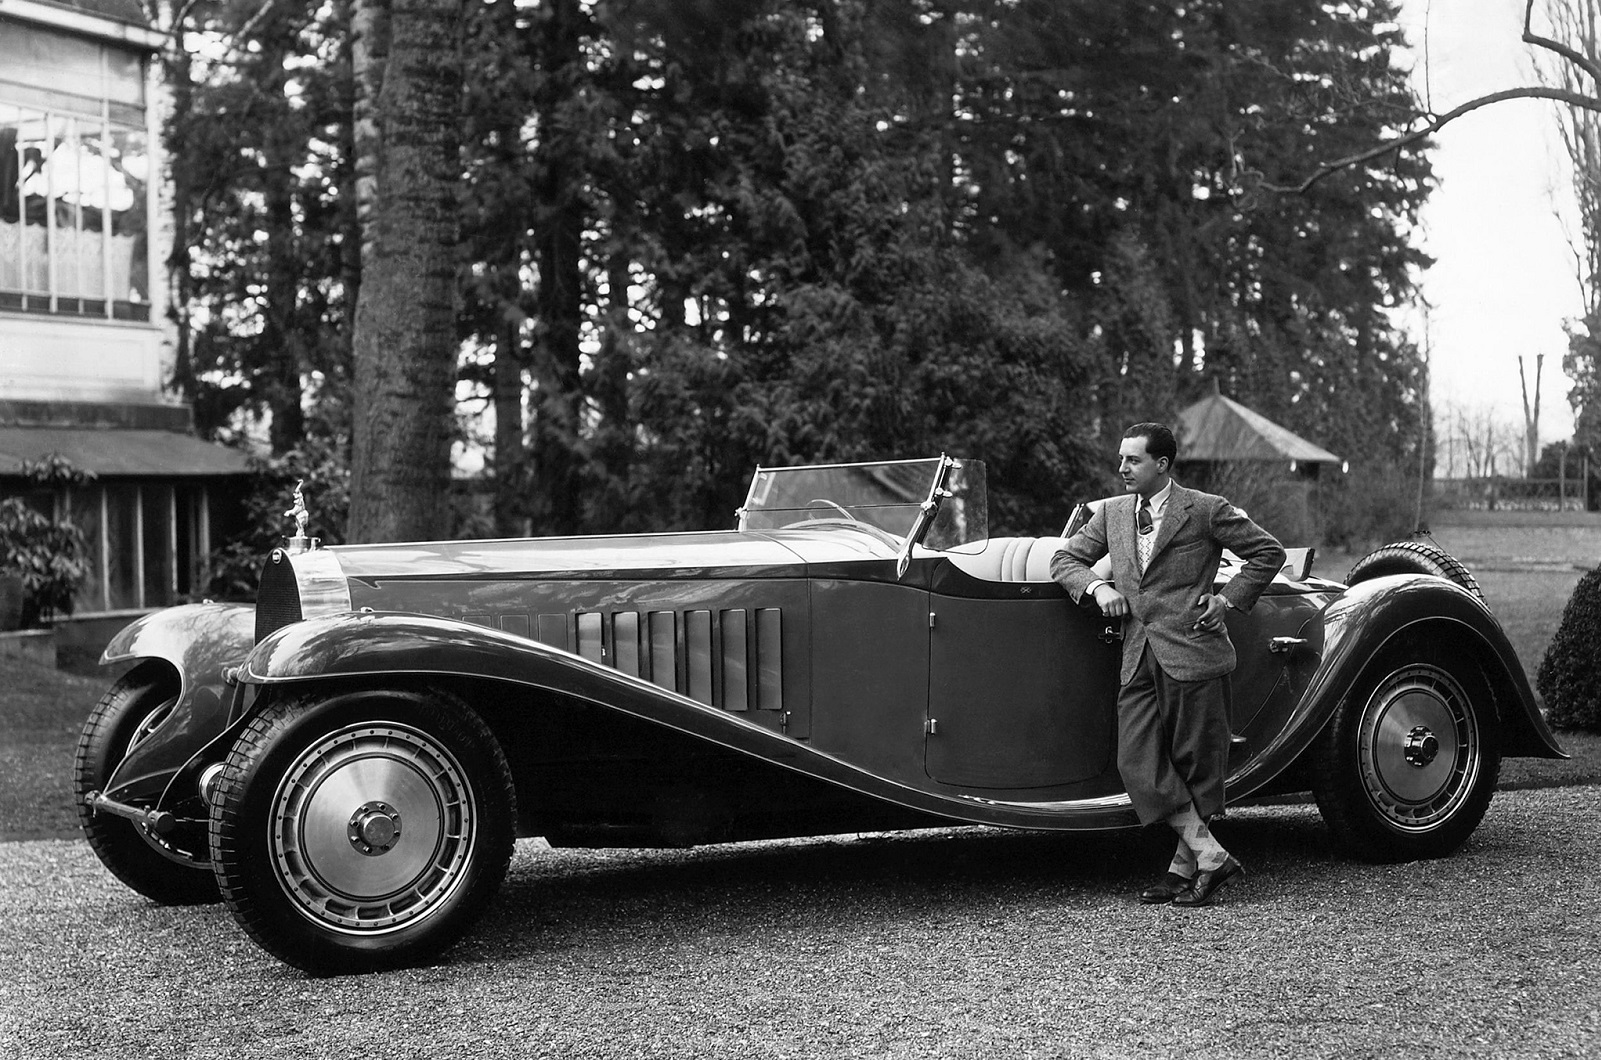 <p>Everything about the <strong>Type 41</strong> Bugatti Royale was big, with the exception of its production number that totaled just <strong>six</strong> cars. The 12.7-liter engine was derived from a design originally penned for the French Air Ministry but never used, so Bugatti repurposed it for its ultimate luxury car.</p><p>The <strong>straight-eight</strong> motor came with three valves per cylinder and produced some <strong>300 hp</strong>. However, these valves needed regularly regrinding and that was an engine out job, making the Royale even more <strong>expensive</strong> to own for its extremely wealthy owners. The engine drove through a three-speed gearbox that was mounted in the center of the chassis and, depending on the coachwork fitted, the Royale could top <strong>100mph</strong>.</p>